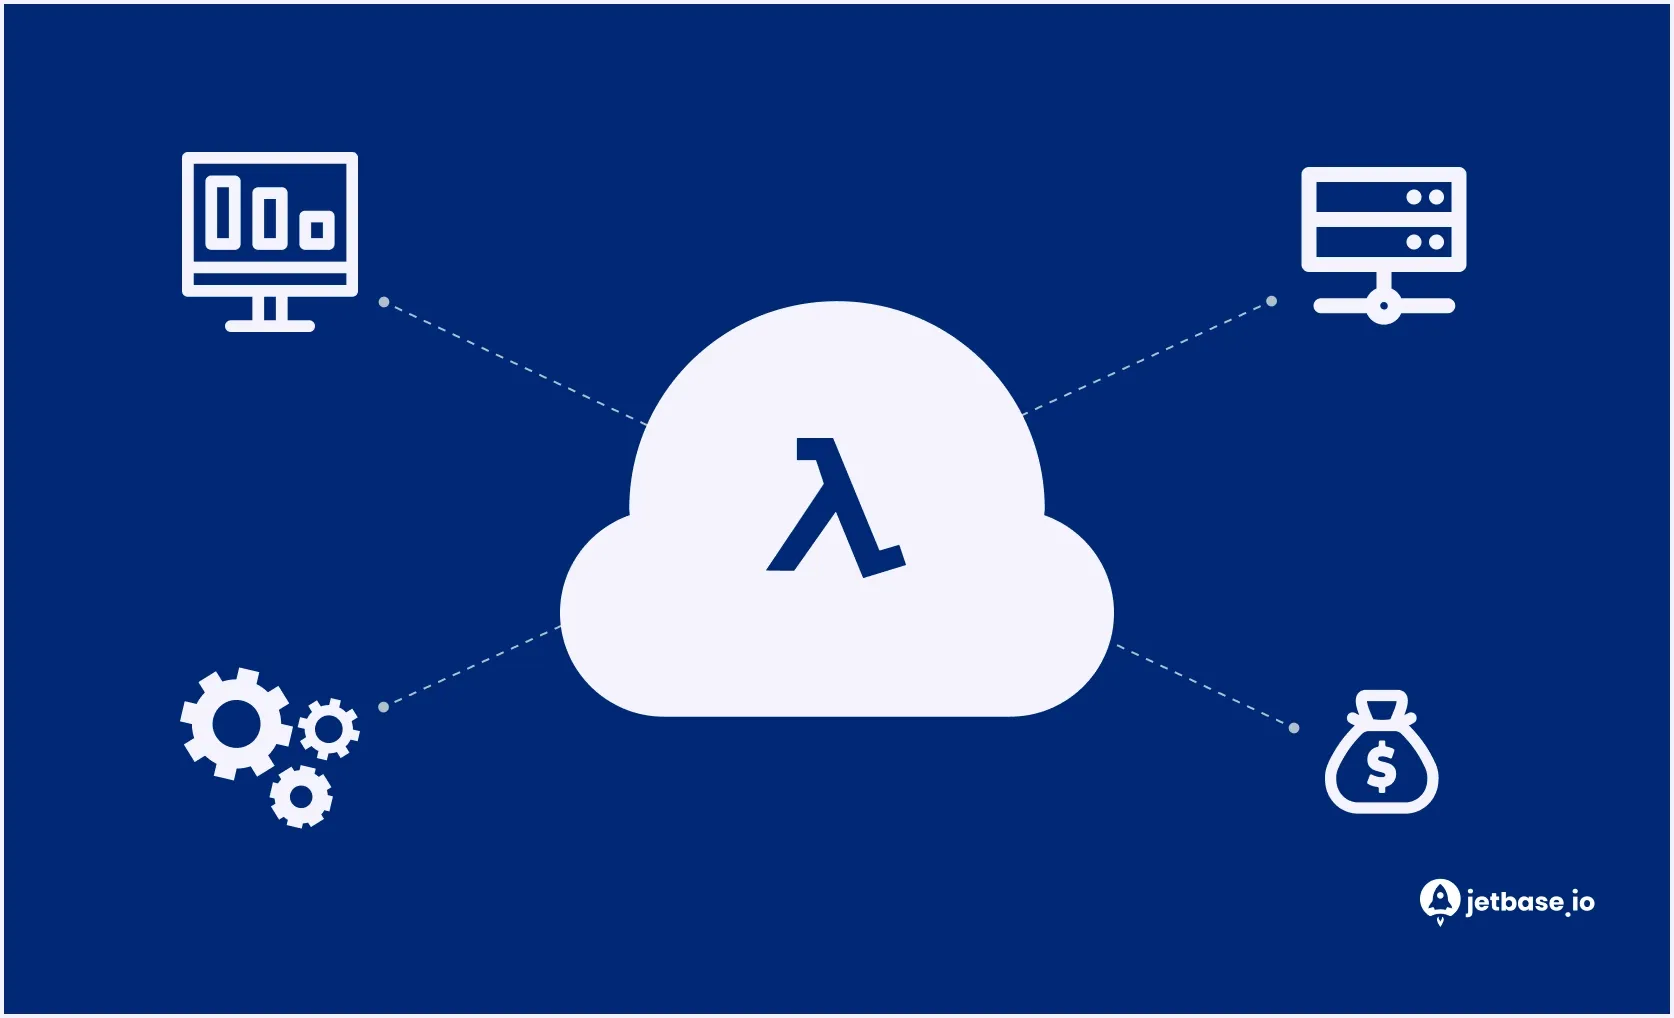 The serverless service by AWS known as Lambda debuted in 2014.webp